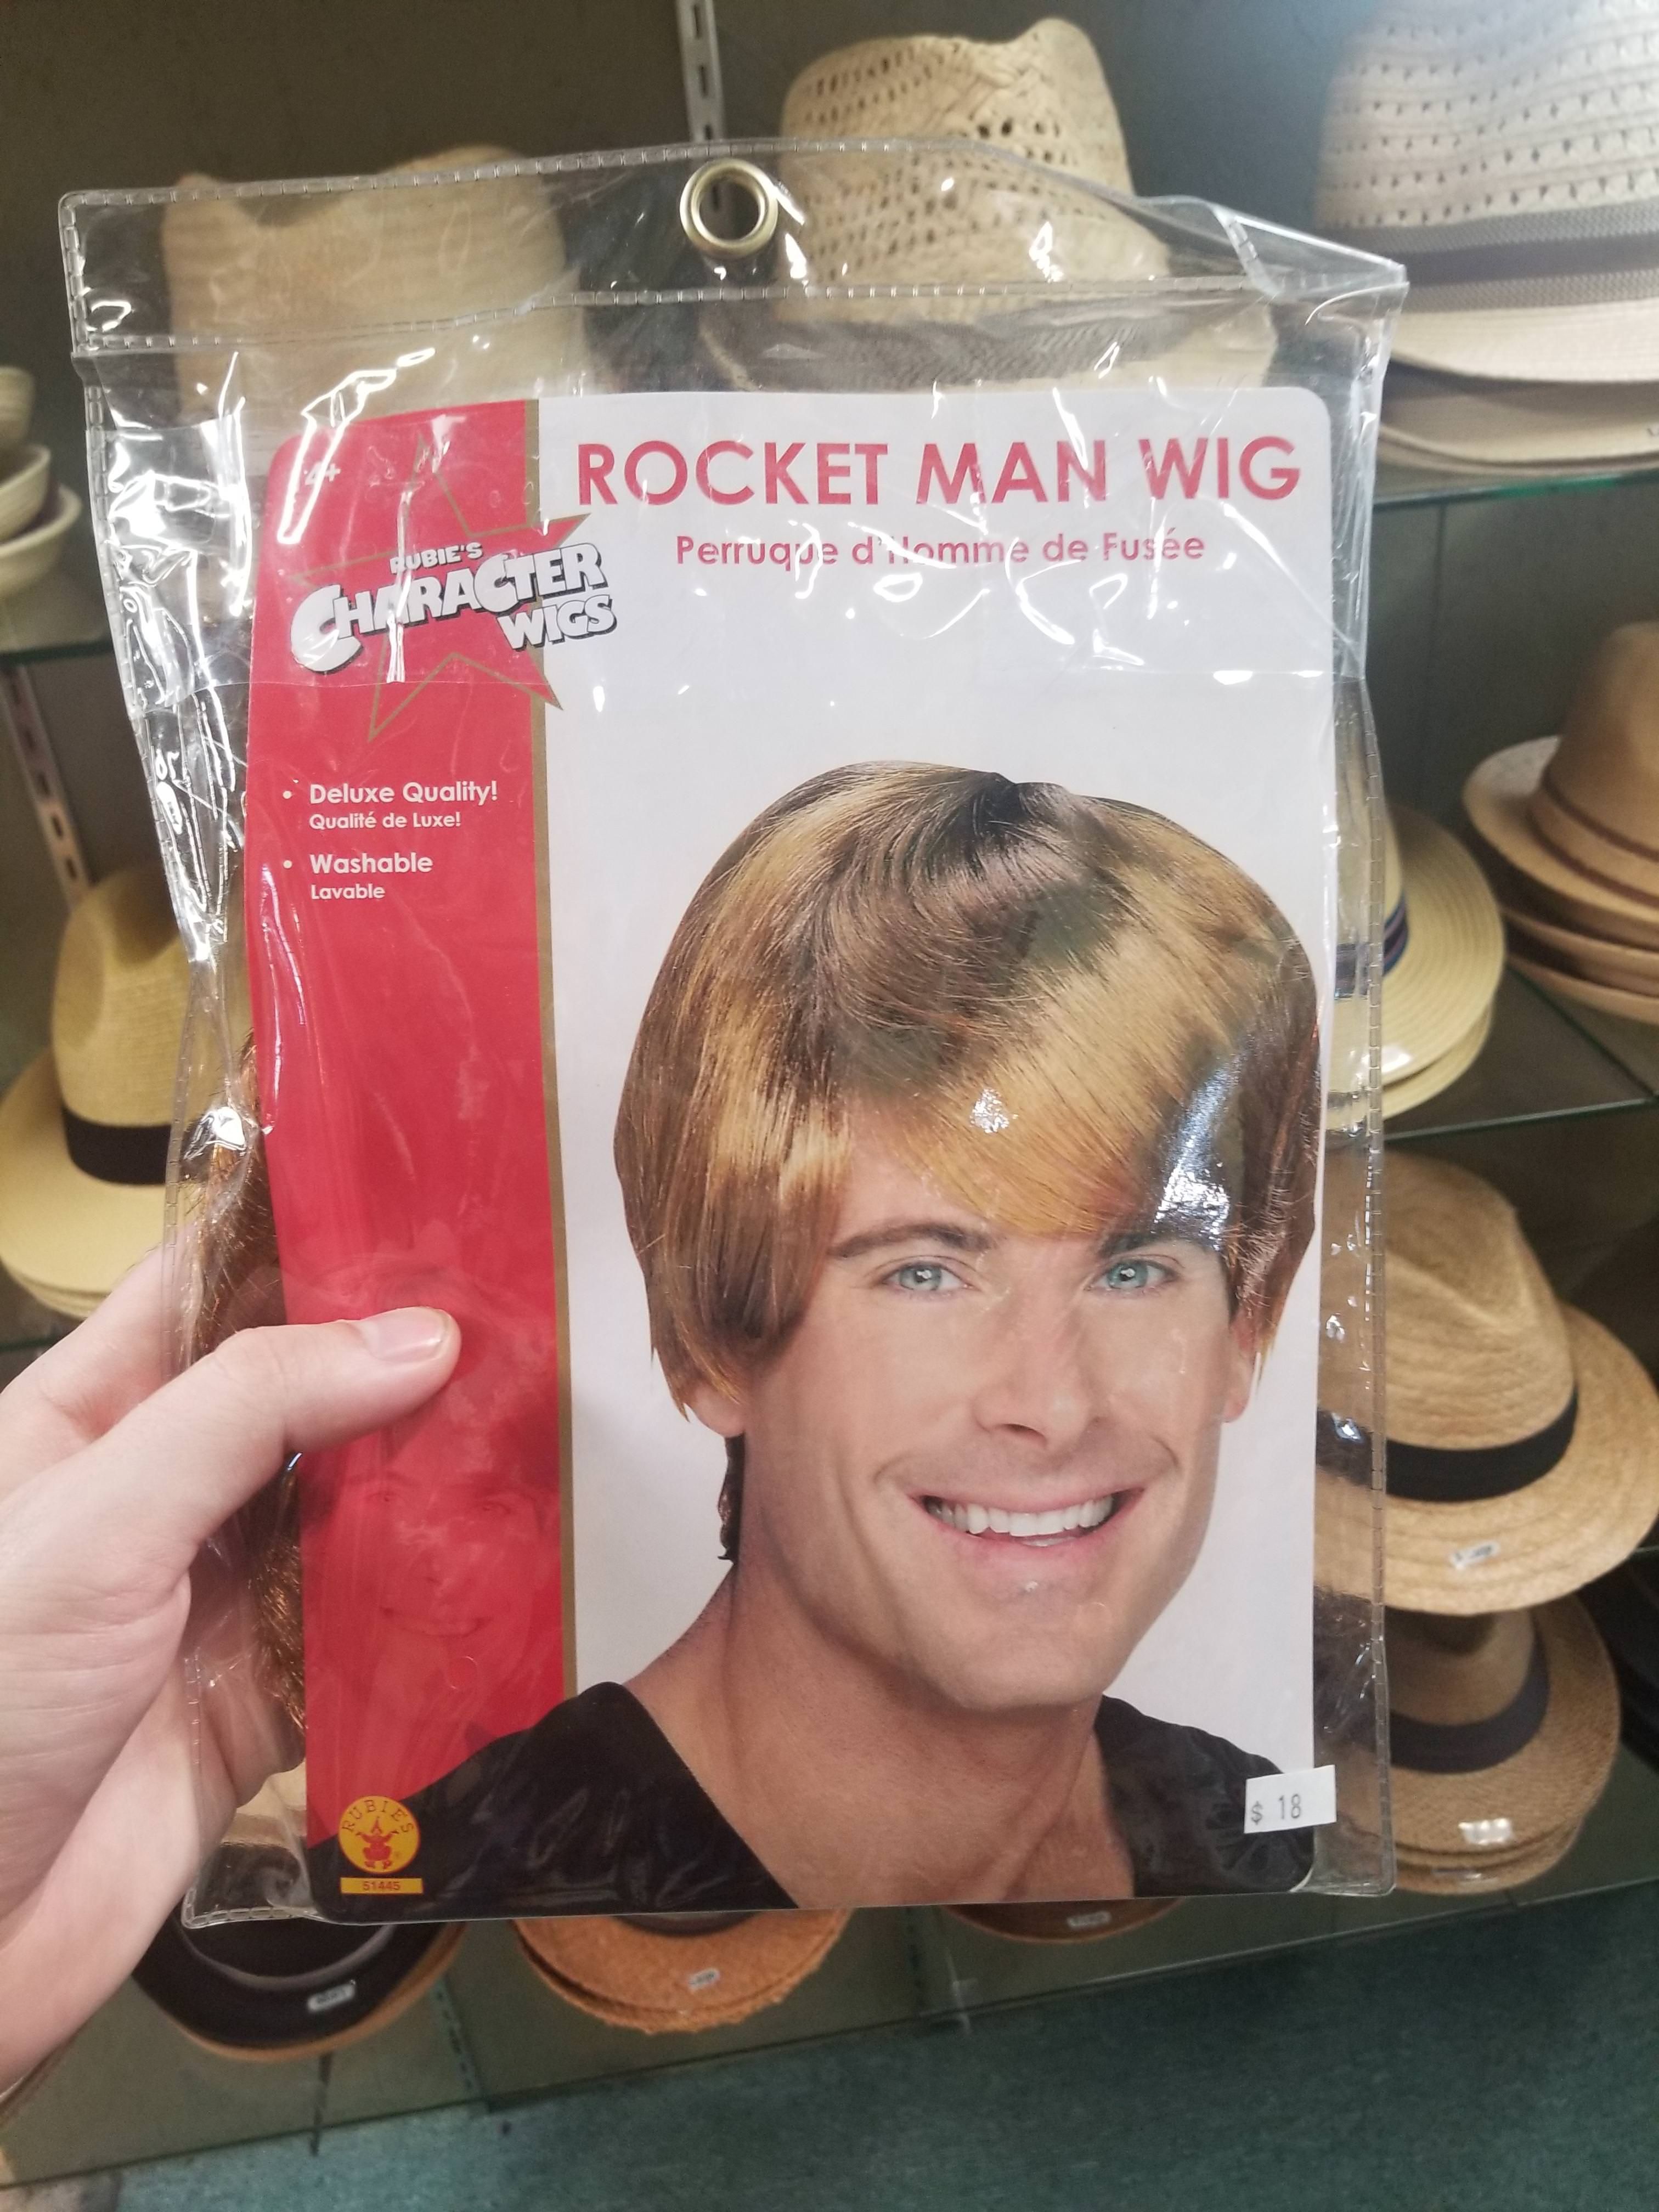 If Rob Lowe and Zac Efron had a child and then that child grew up to be a Halloween wig model